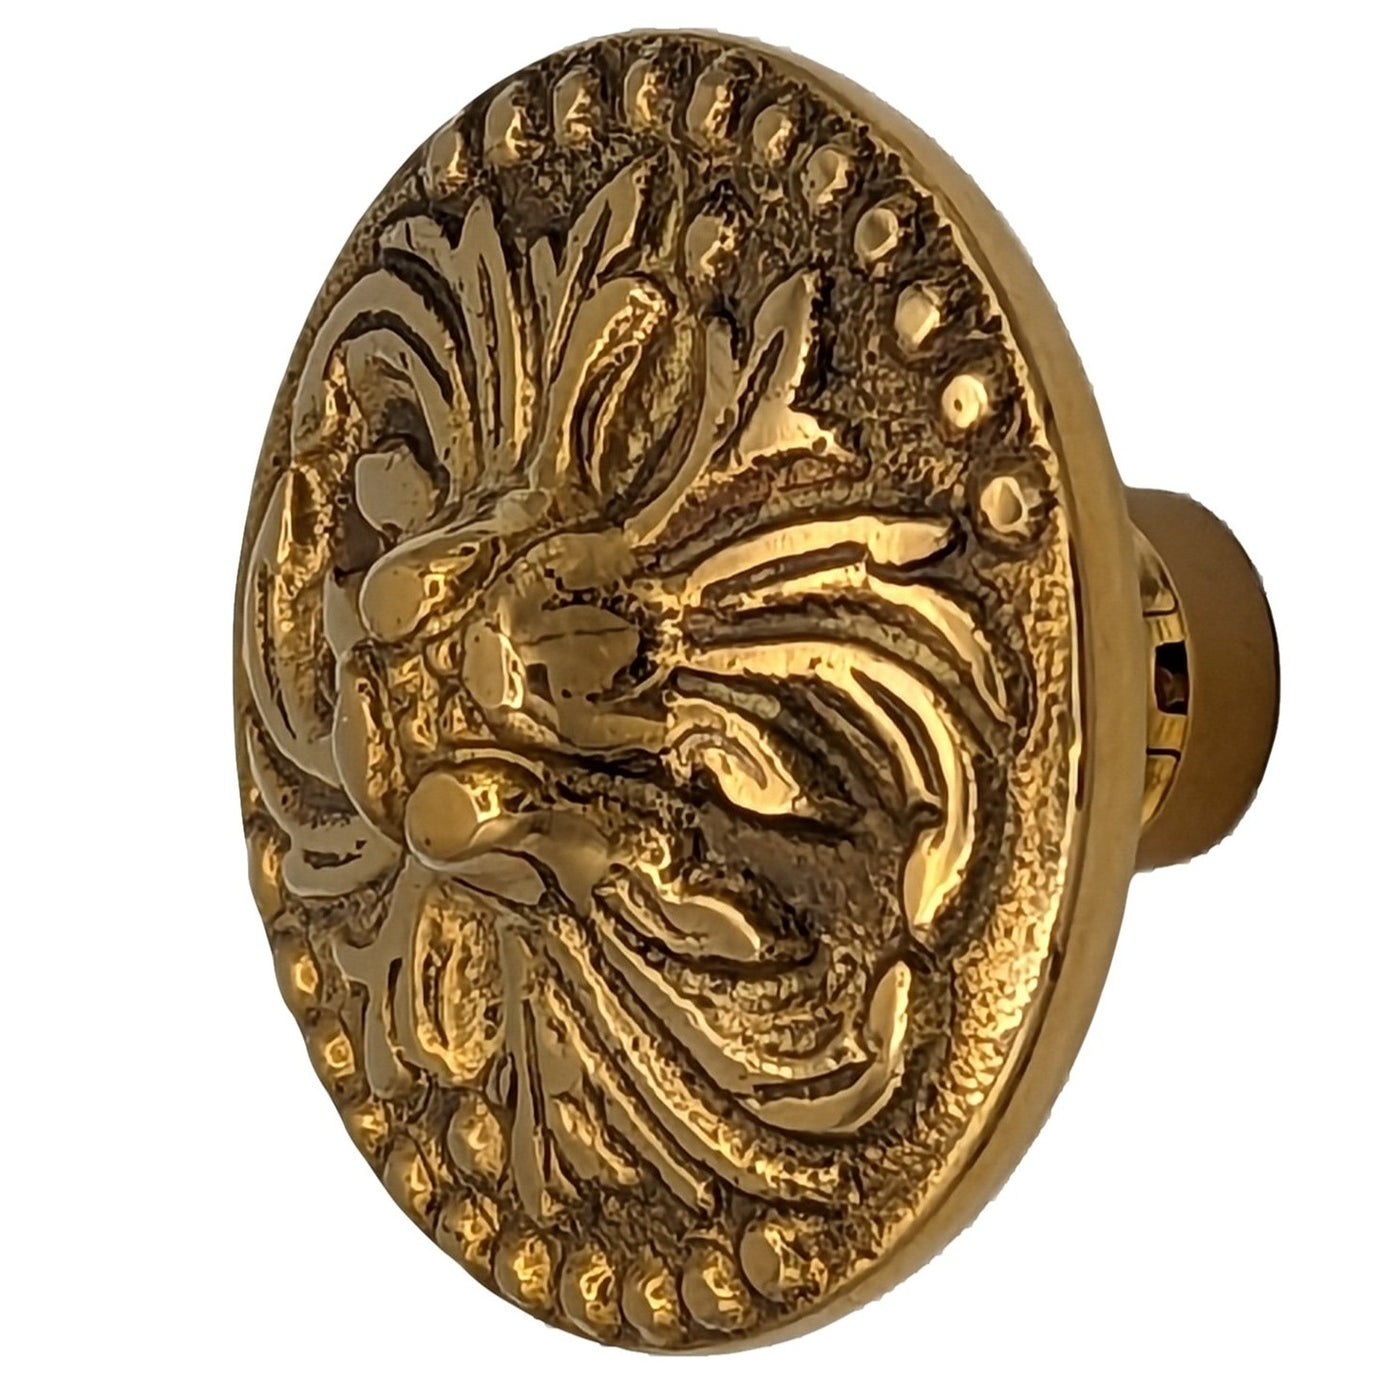 1 7/8 Inch Solid Brass Rococo Victorian Cabinet and Furniture Knob (Several Finishes Available)